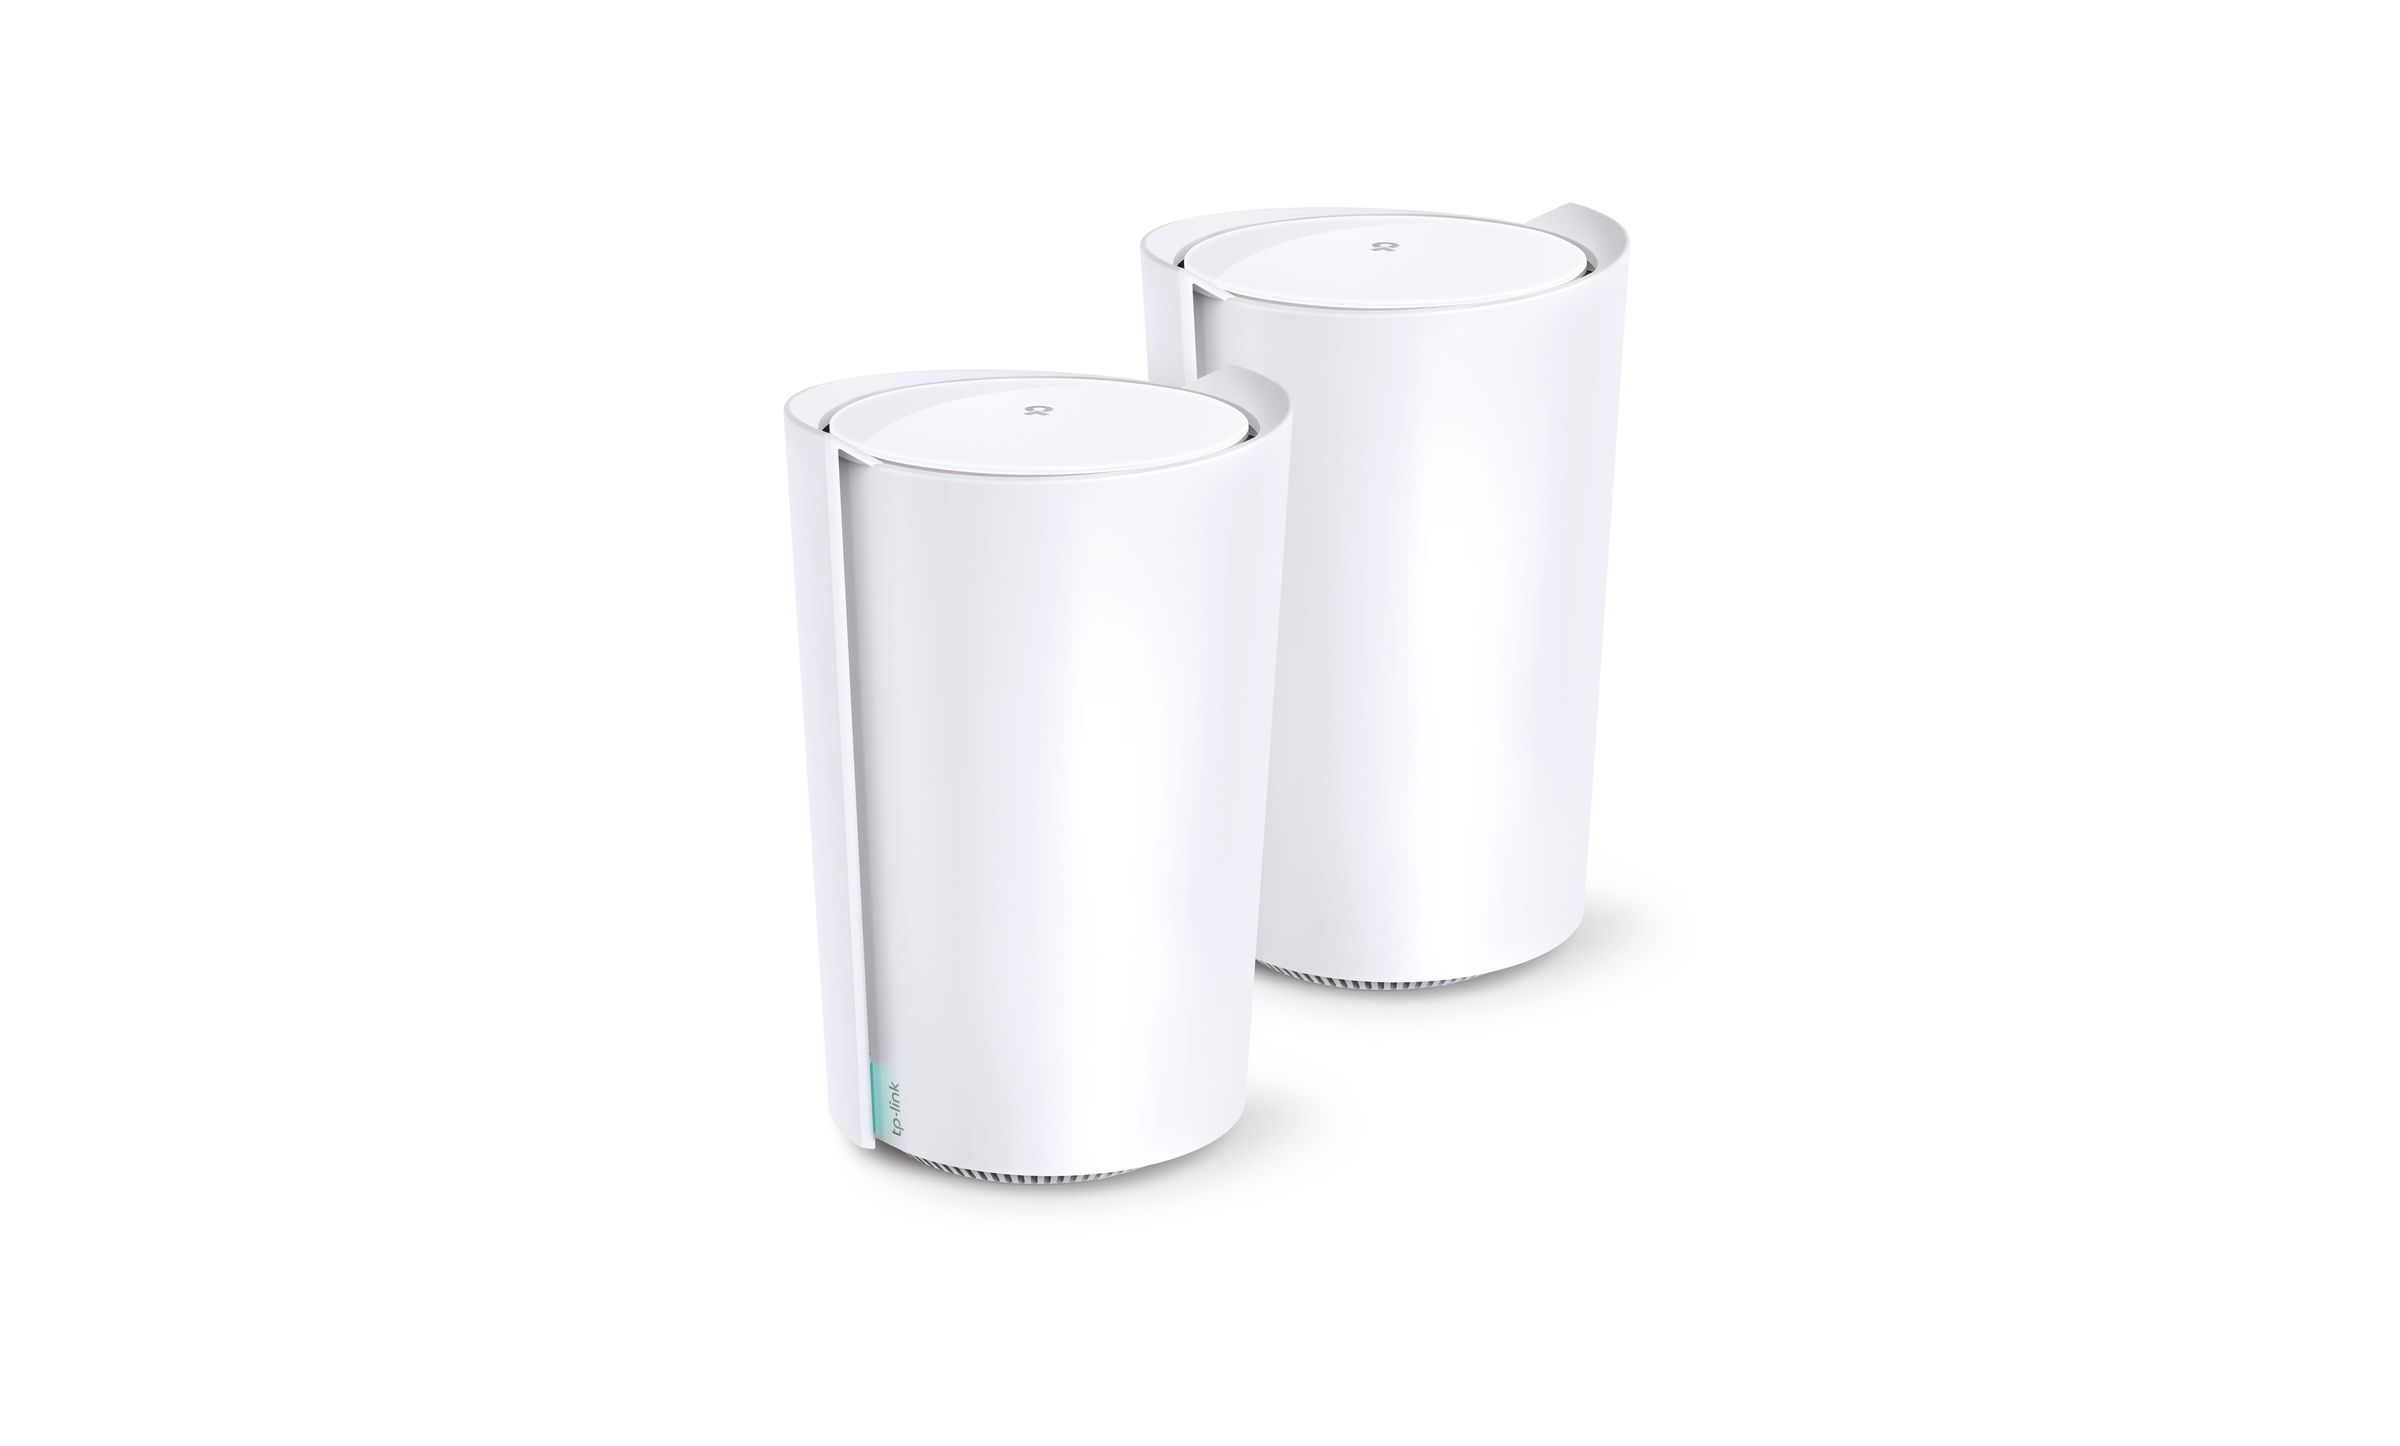 TP-Link unveiled three tiers of the Deco Mesh Wi-Fi 6. The mid-tier Deco X60 offers 3 Gbps of bandwidth and 5,000 square feet of range across two units. A two pack will be available in March for $270.